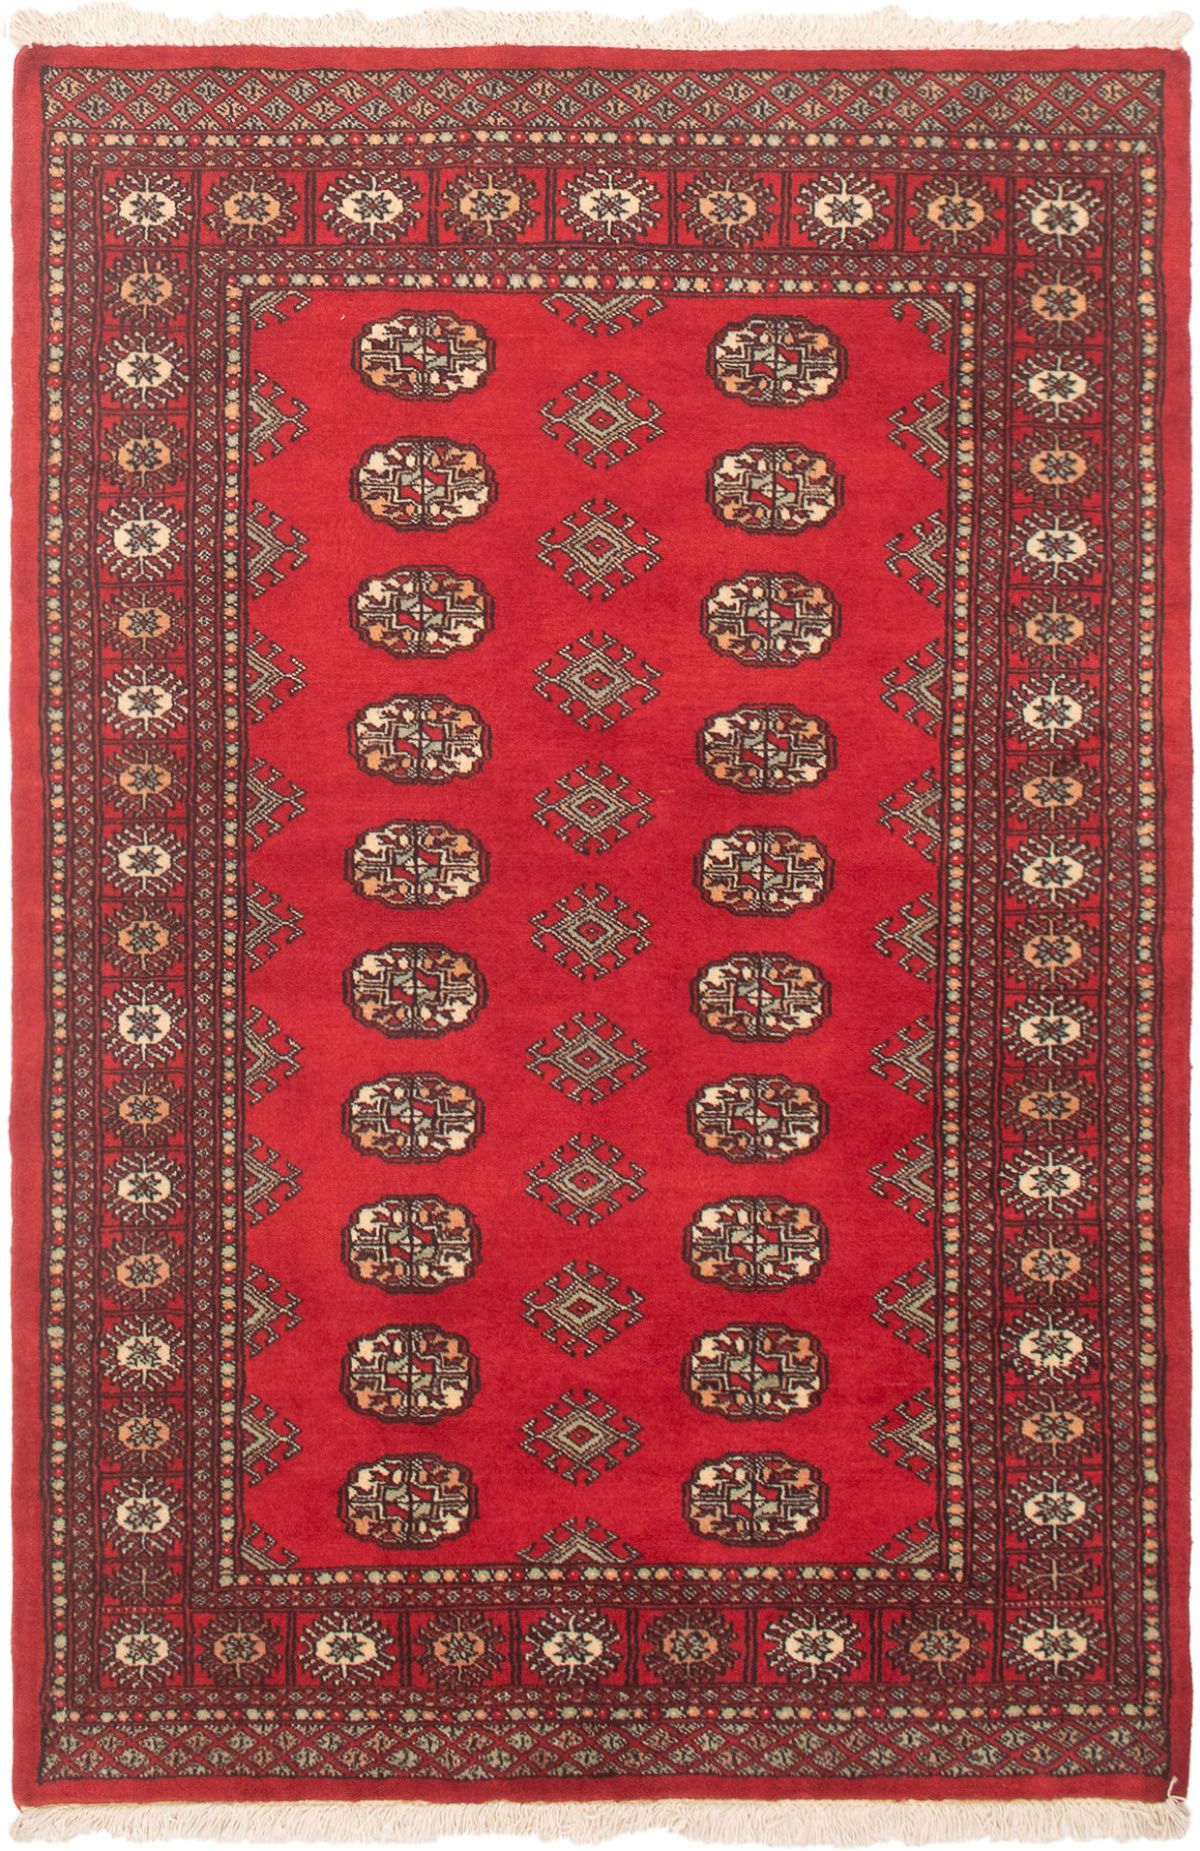 Hand-knotted Finest Peshawar Bokhara Red Wool Rug 4'2" x 6'3"  Size: 4'2" x 6'3"  